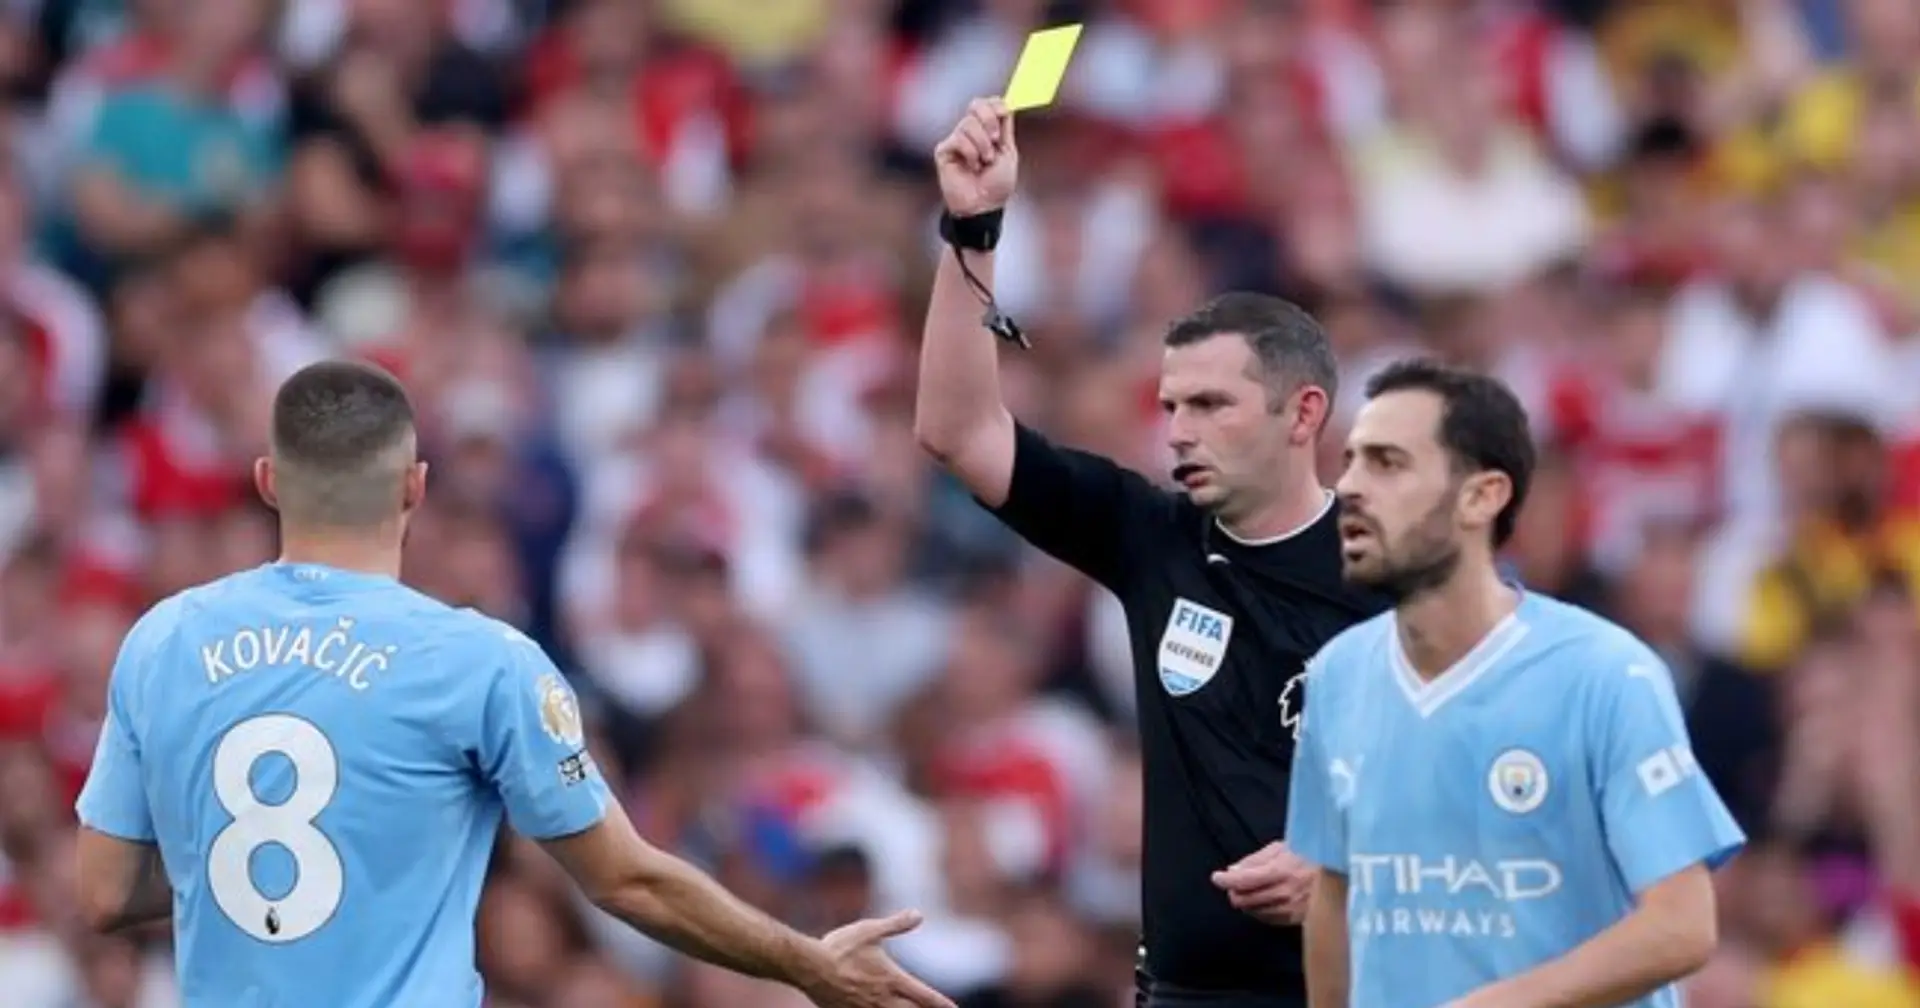 Michael Oliver's recent trip to UAE revealed — same ref who didn't send Kovacic off twice